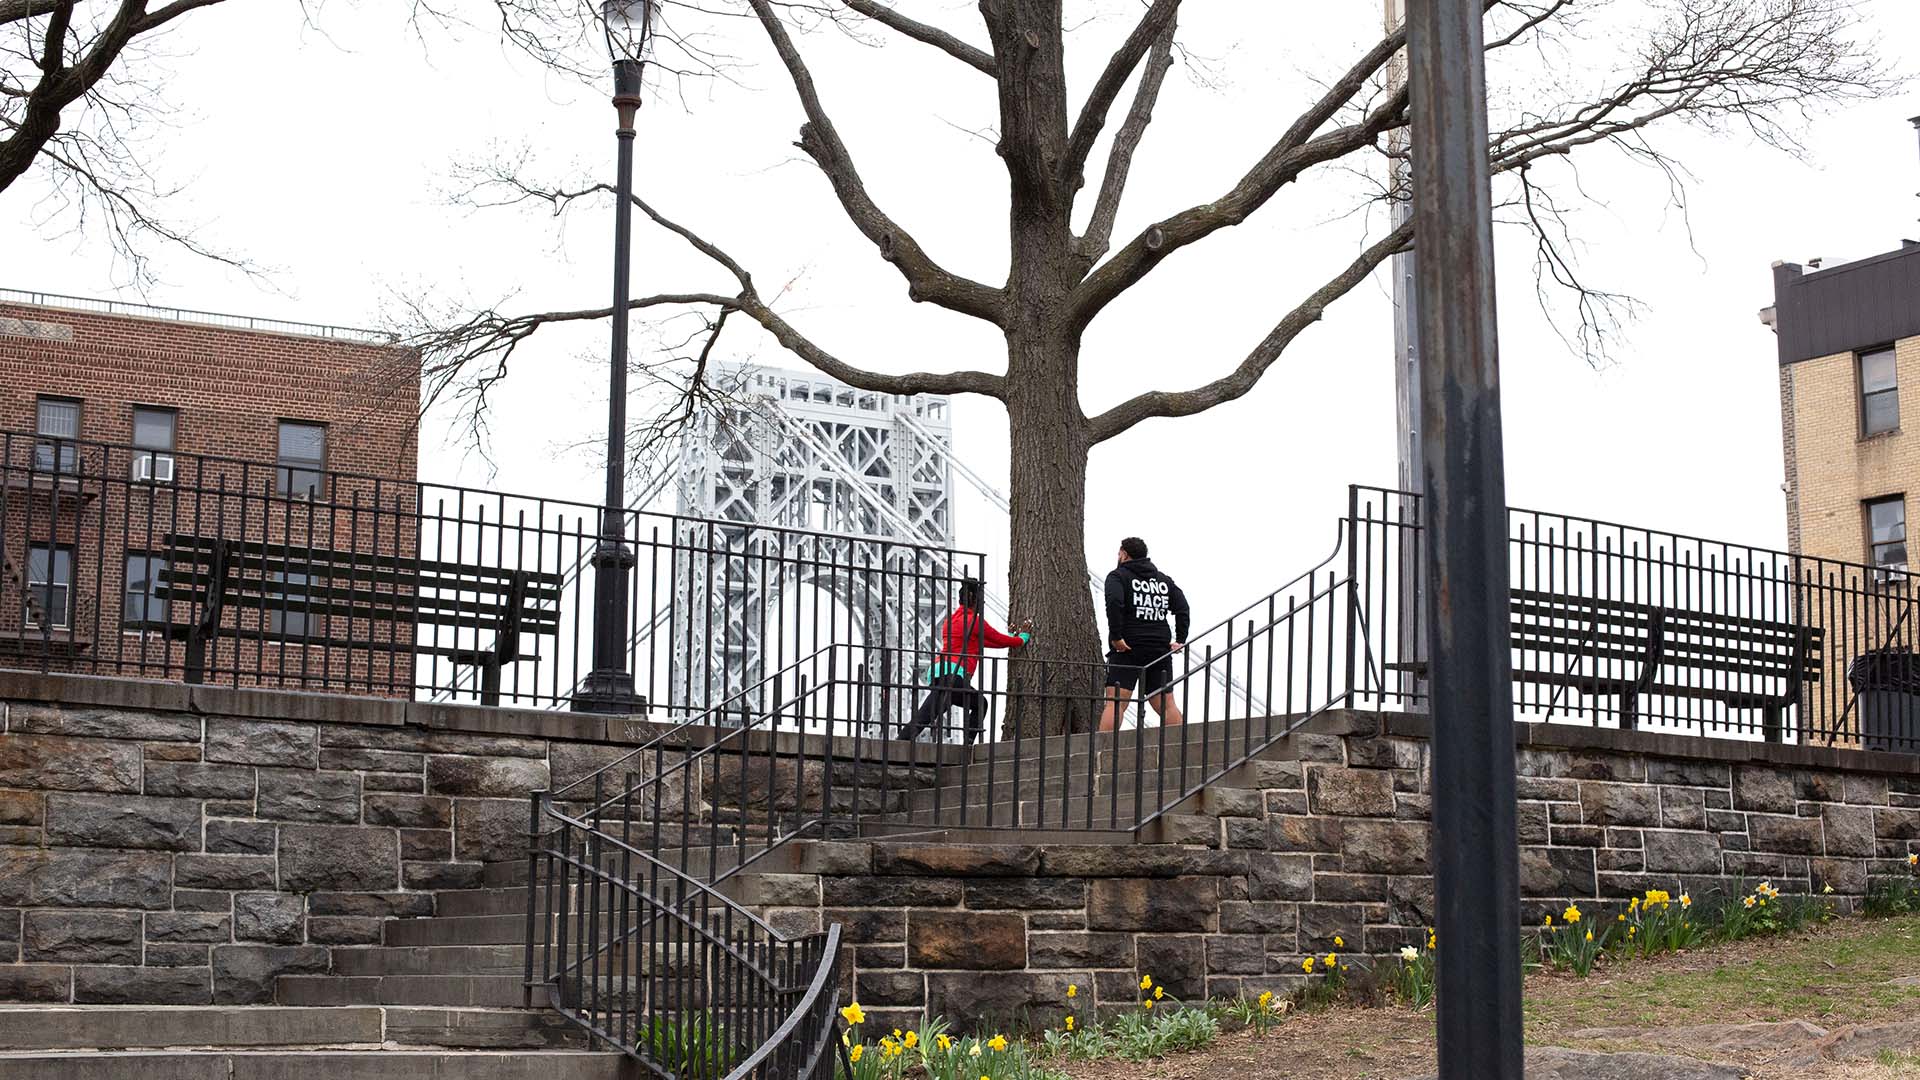 About the Journey podcast host Oneika Raymond and We Run Uptown founder Hector Espinal running by the George Washington Bridge in Washington Heights, New York City